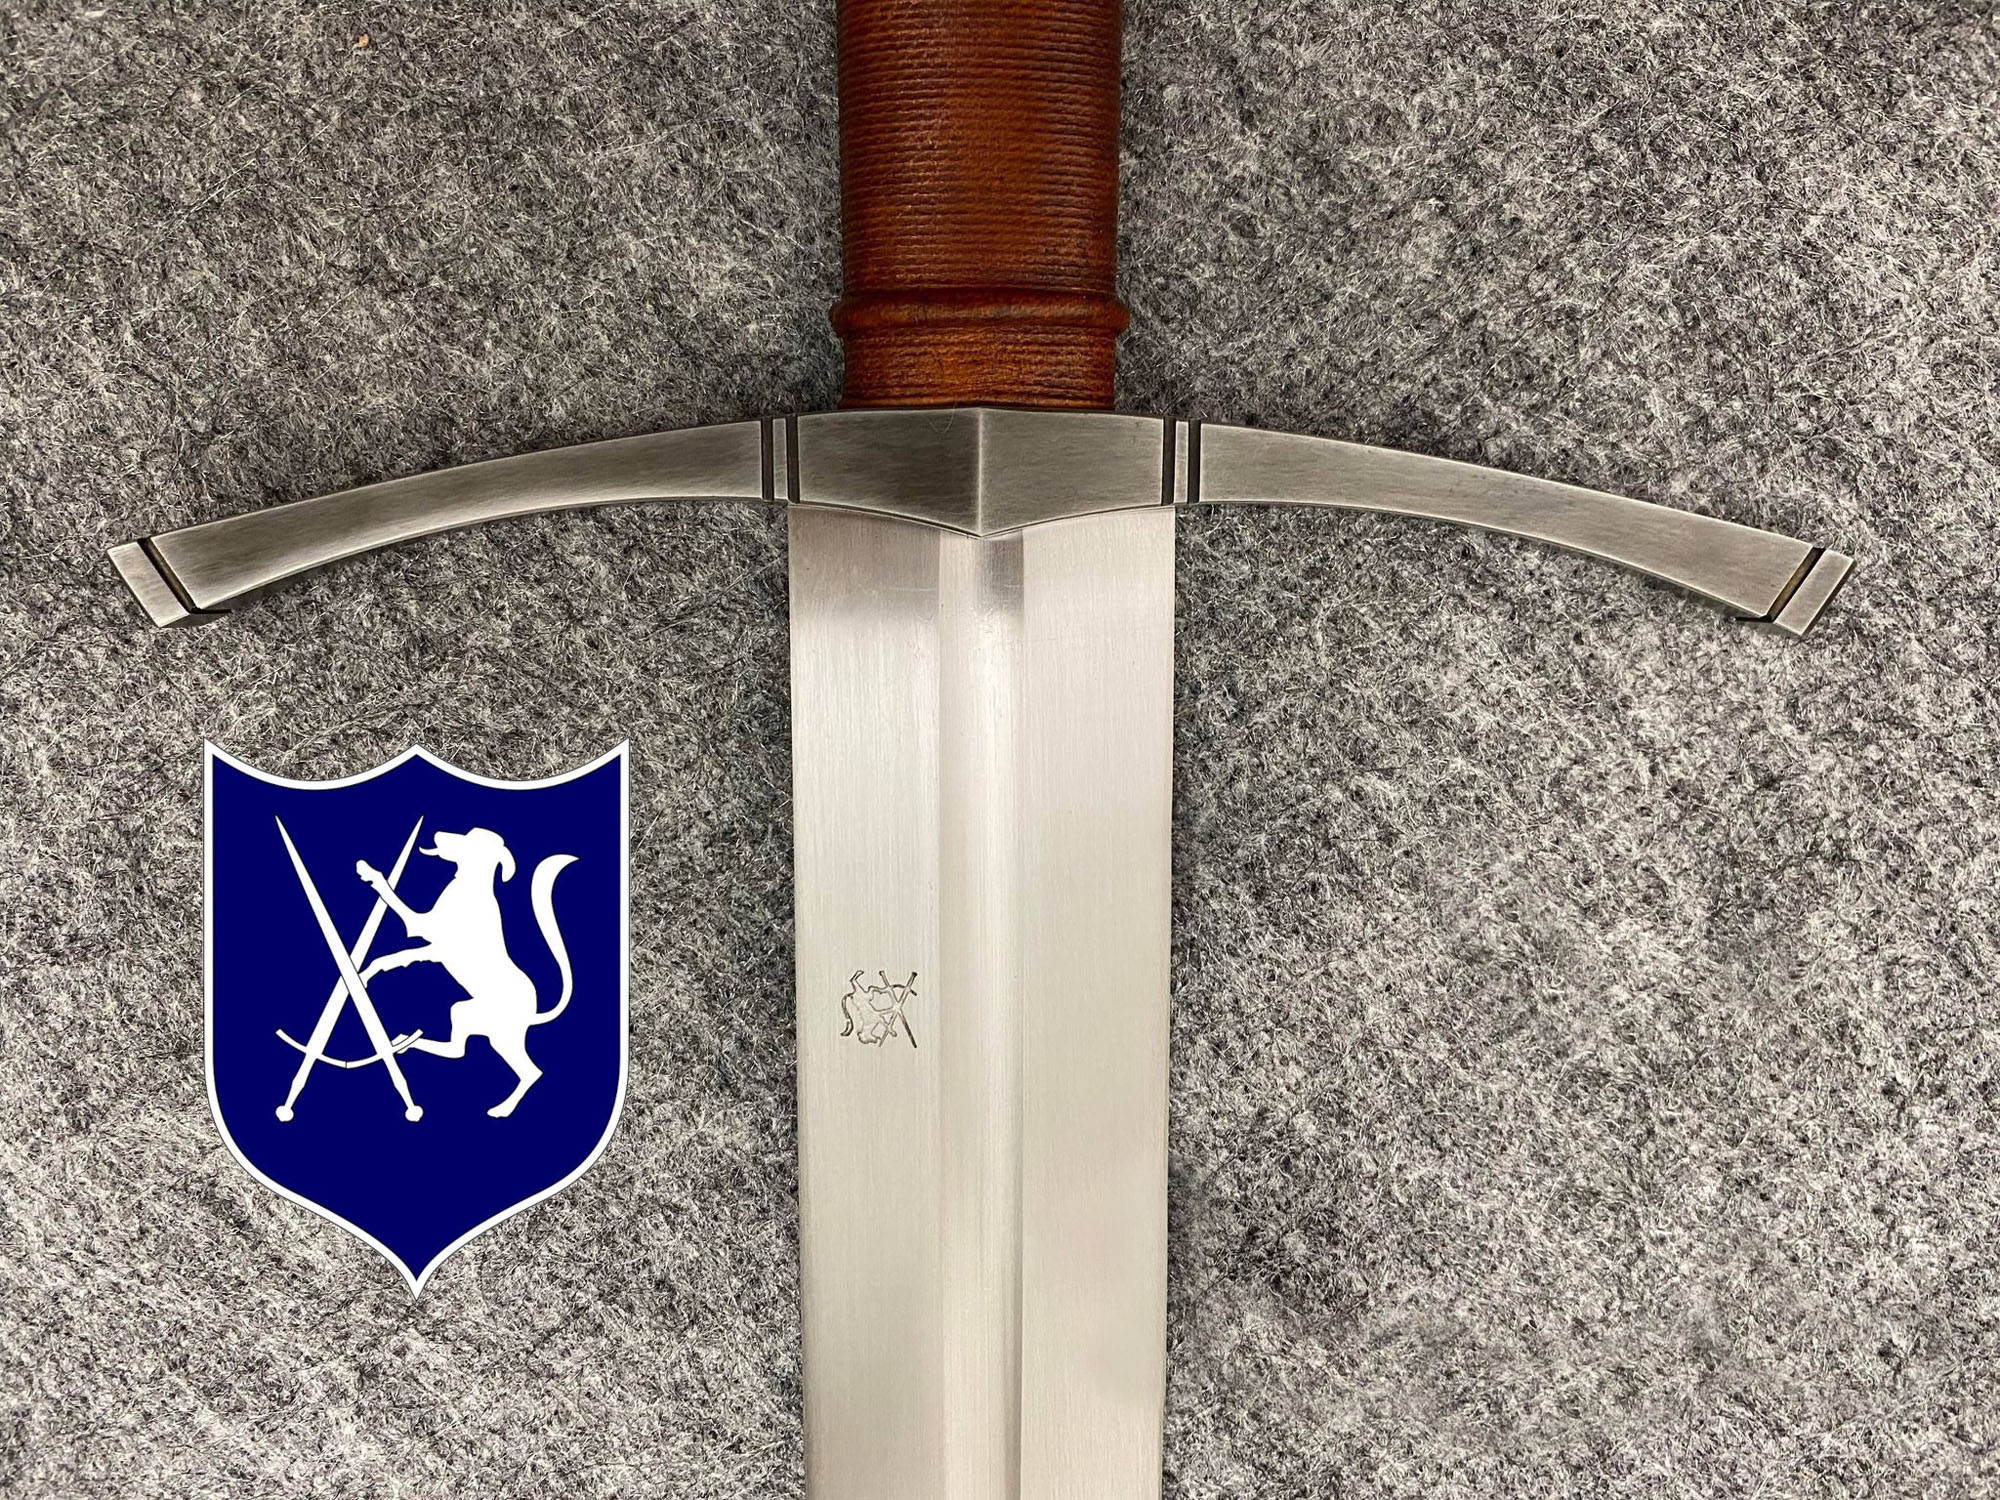 The Ansbach Sword, handforged and sharp blade